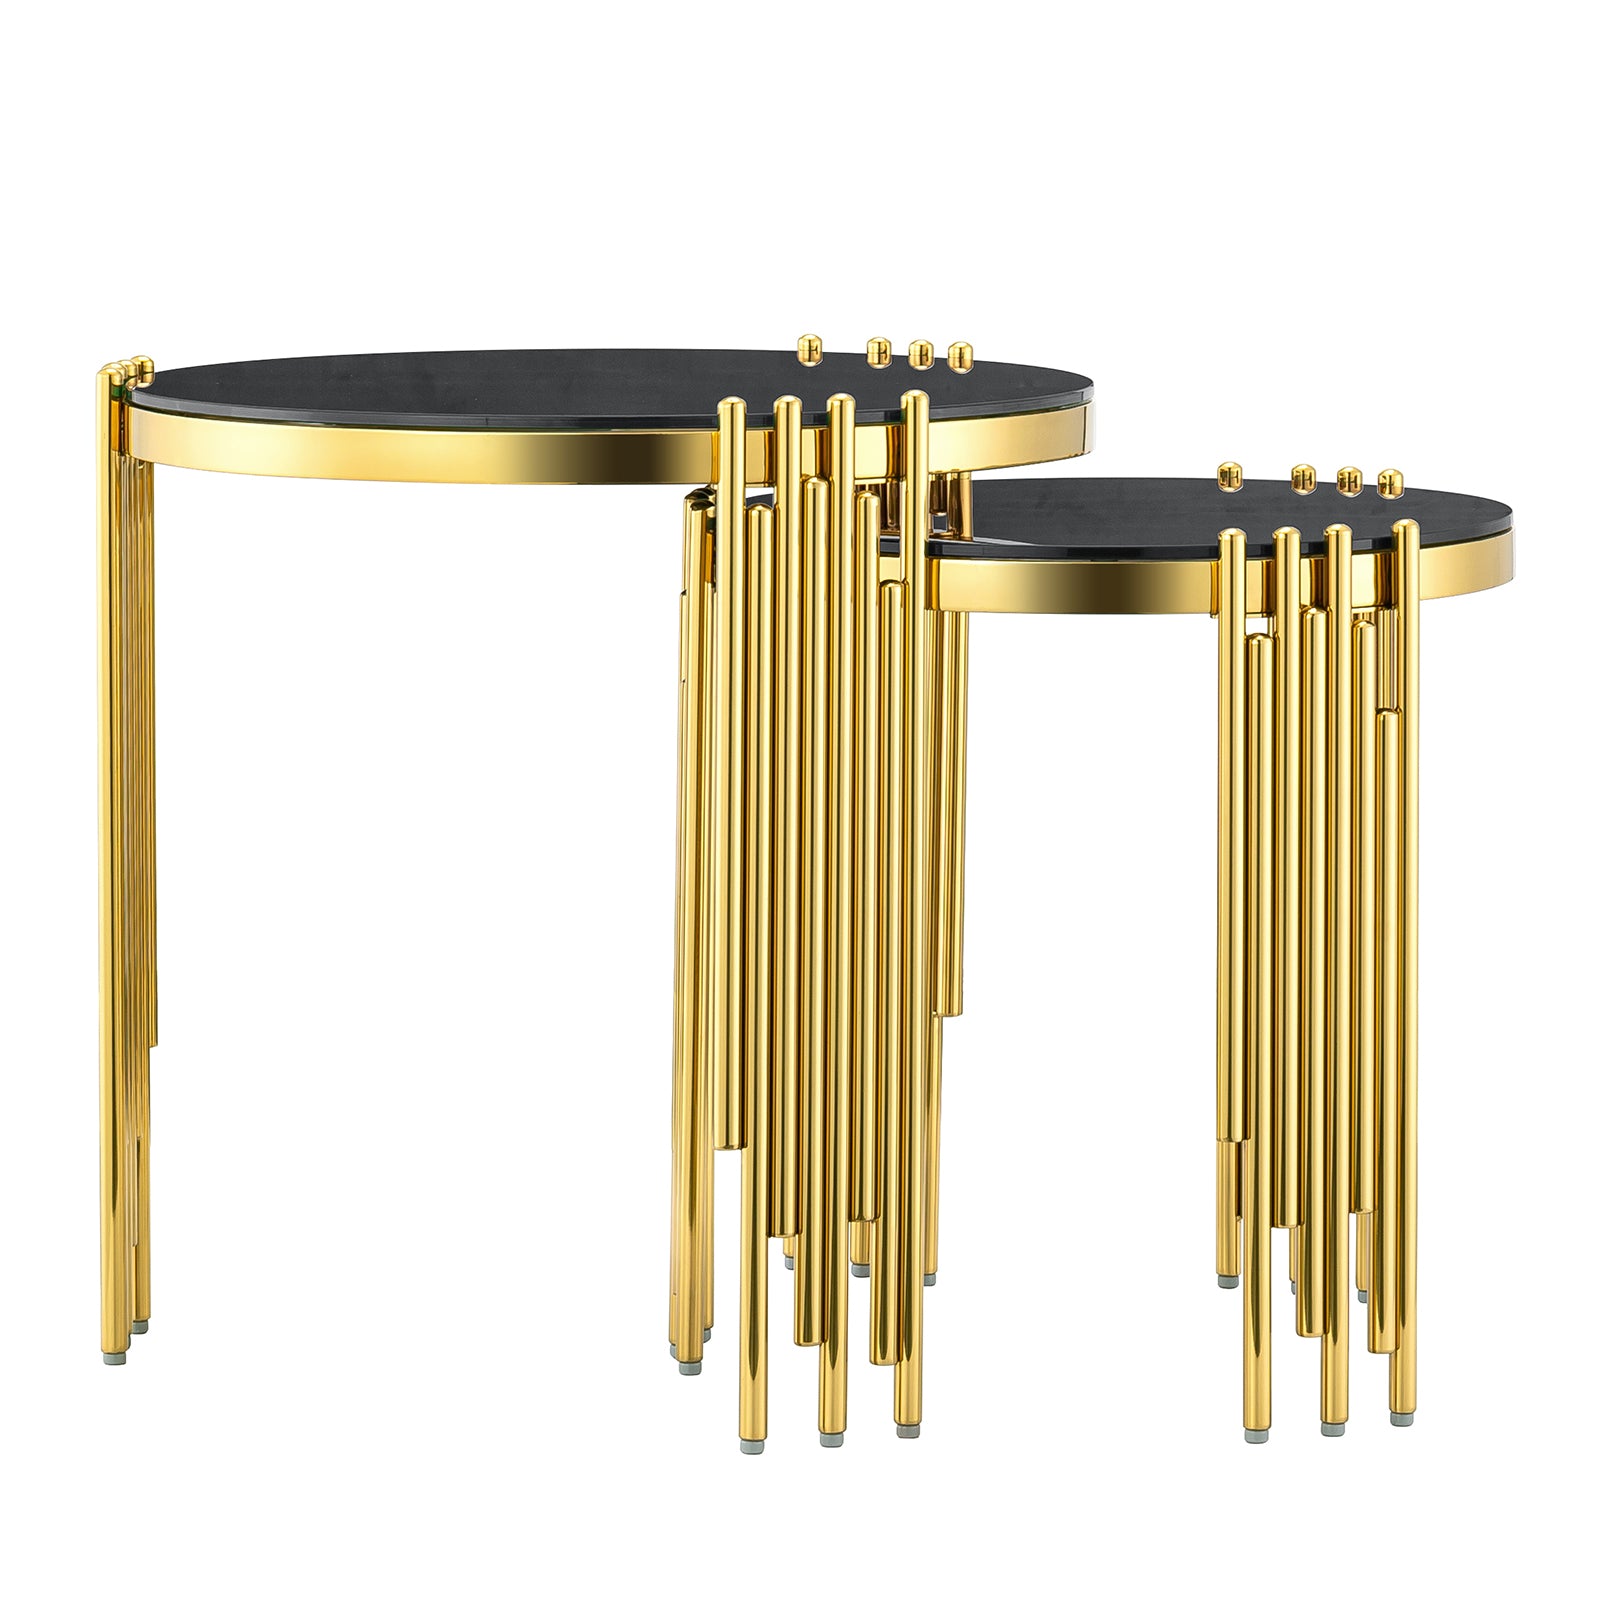 Nesting End Table with Metal multi-cylindrical legs | E420